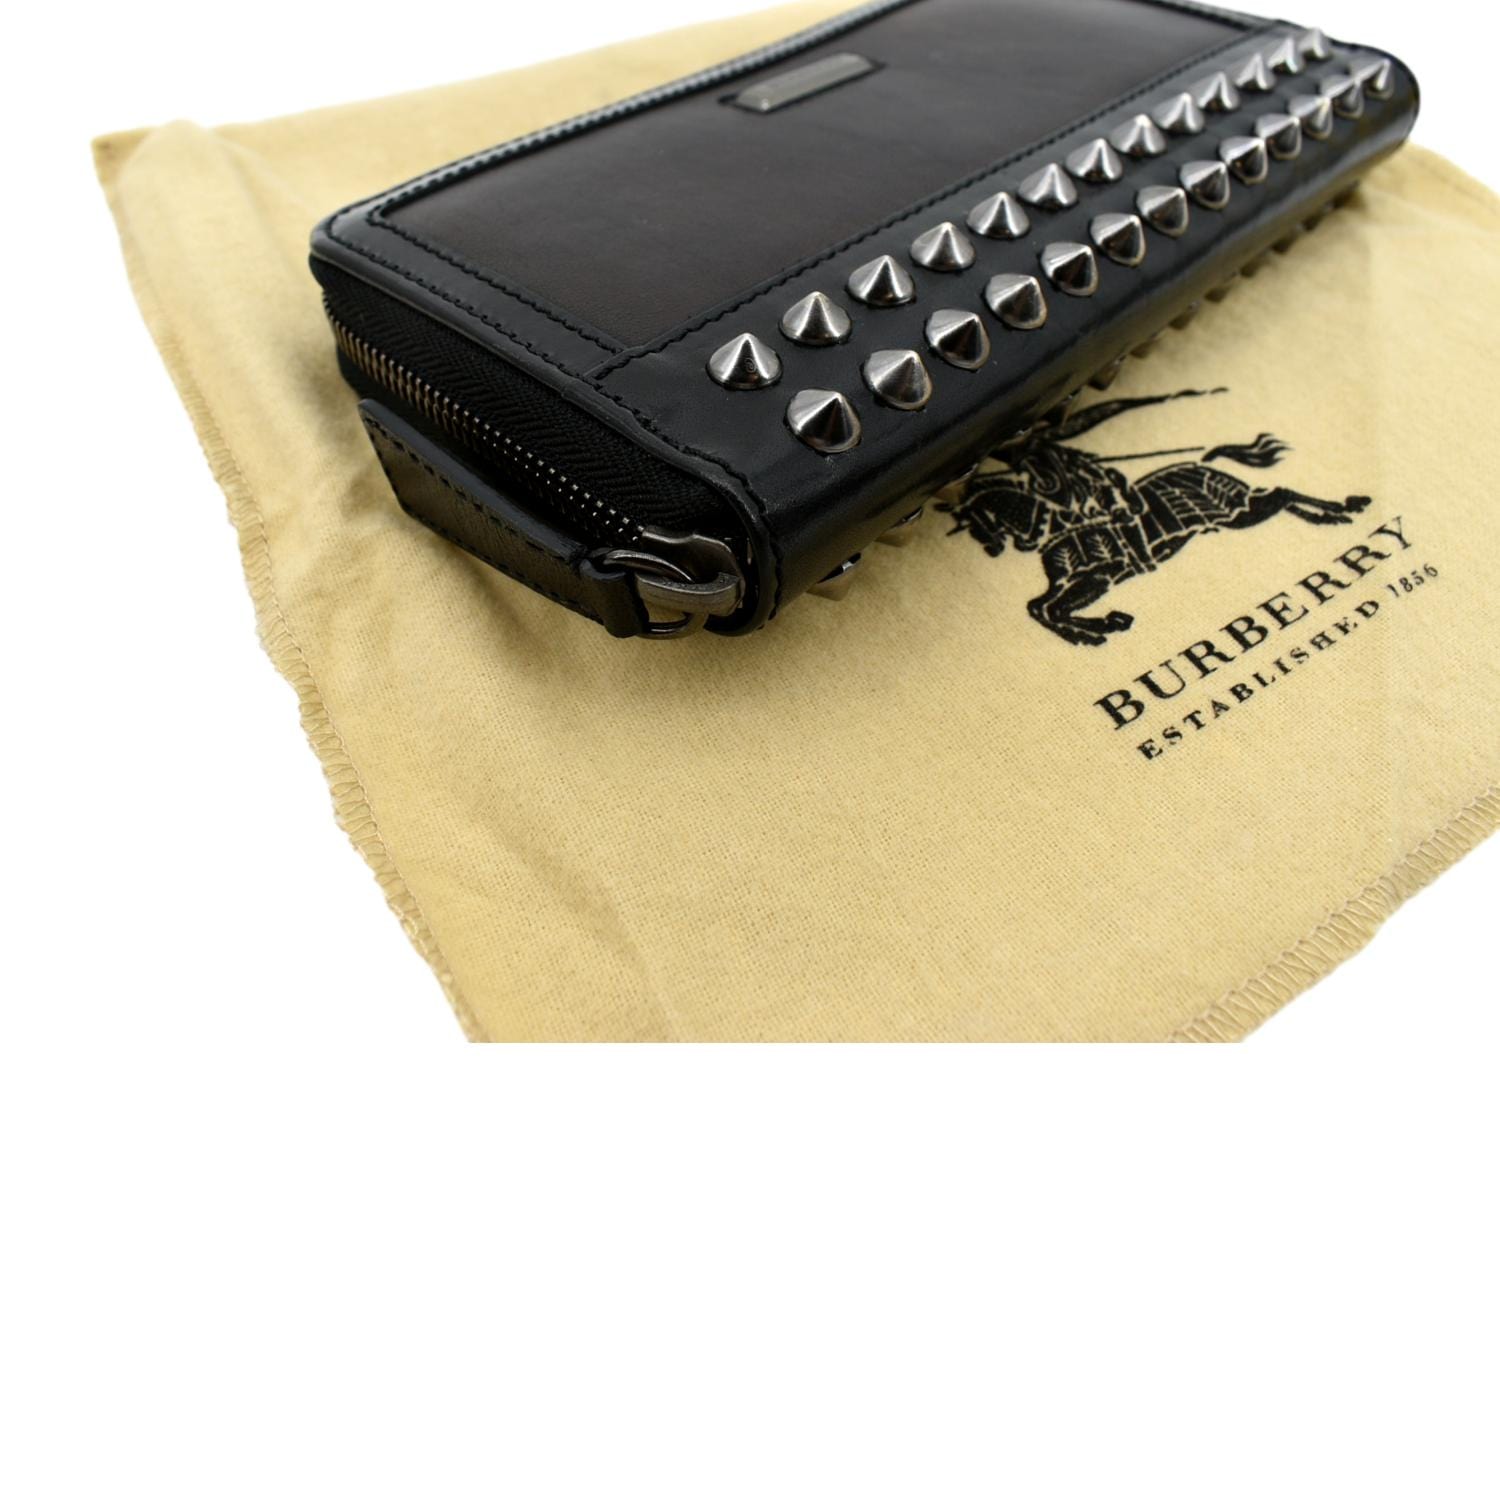 Burberry Studded Wallets for Women